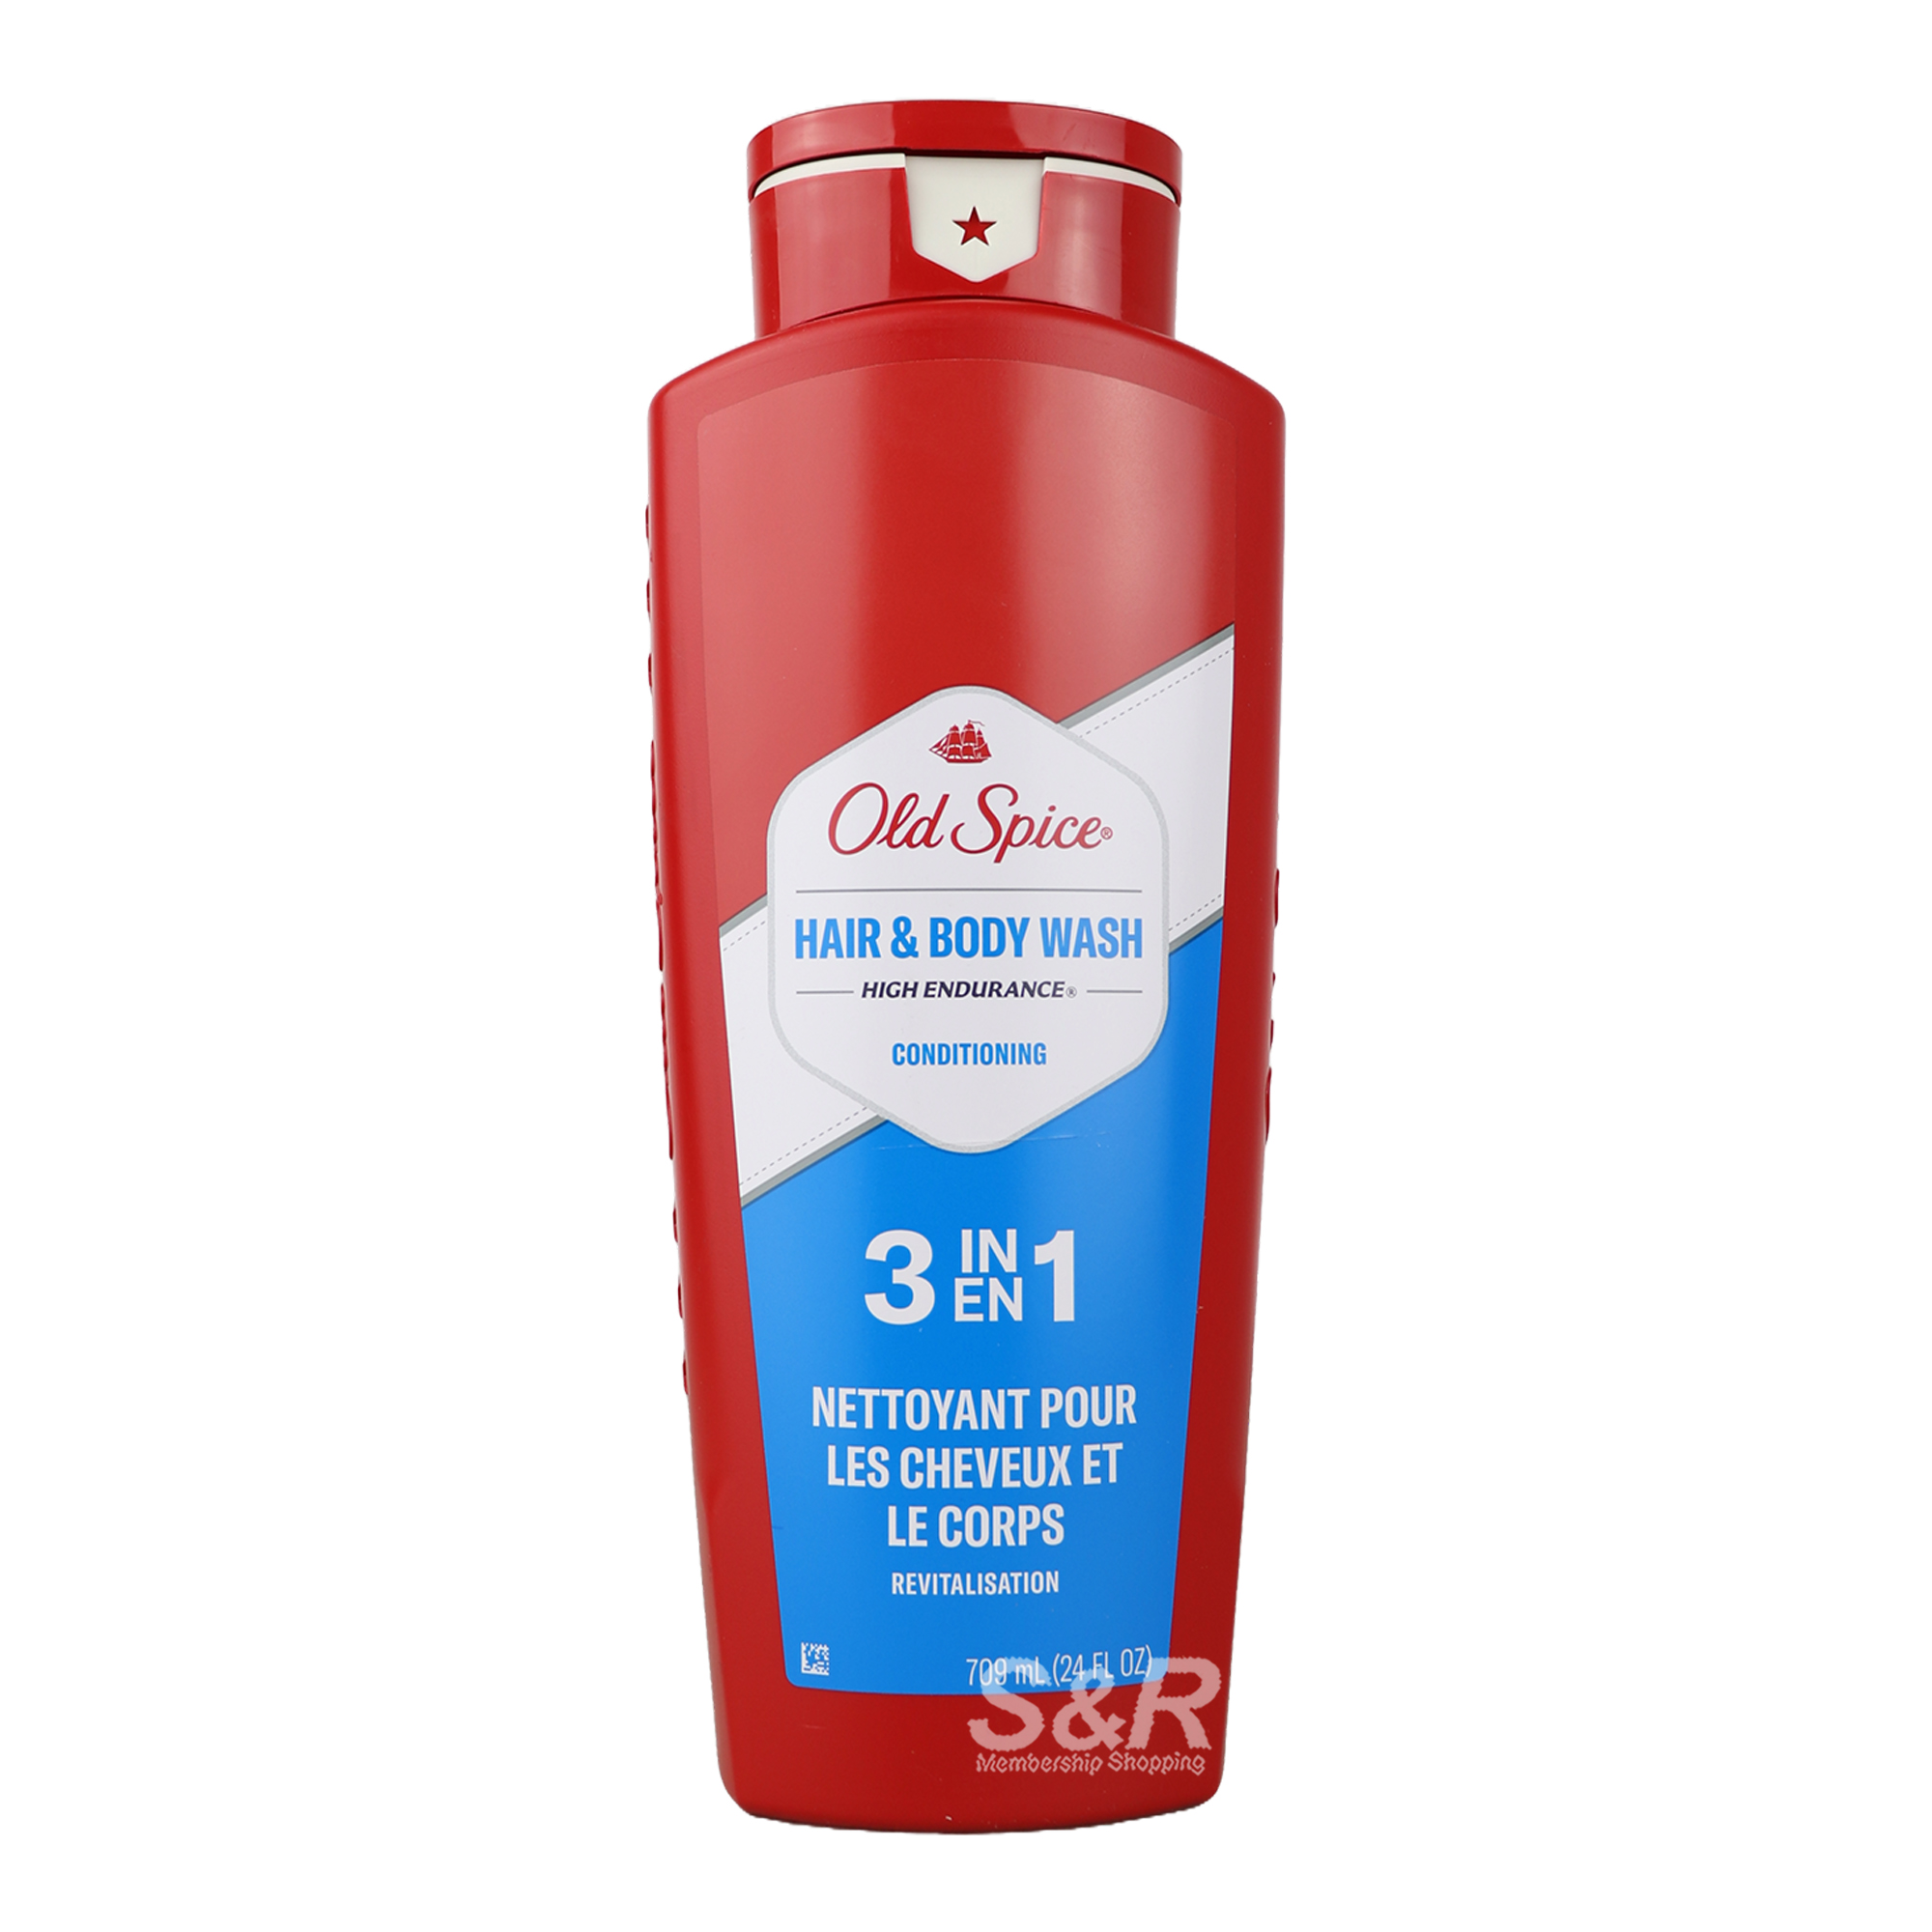 Old Spice Hair & Body Wash Conditioning 709mL